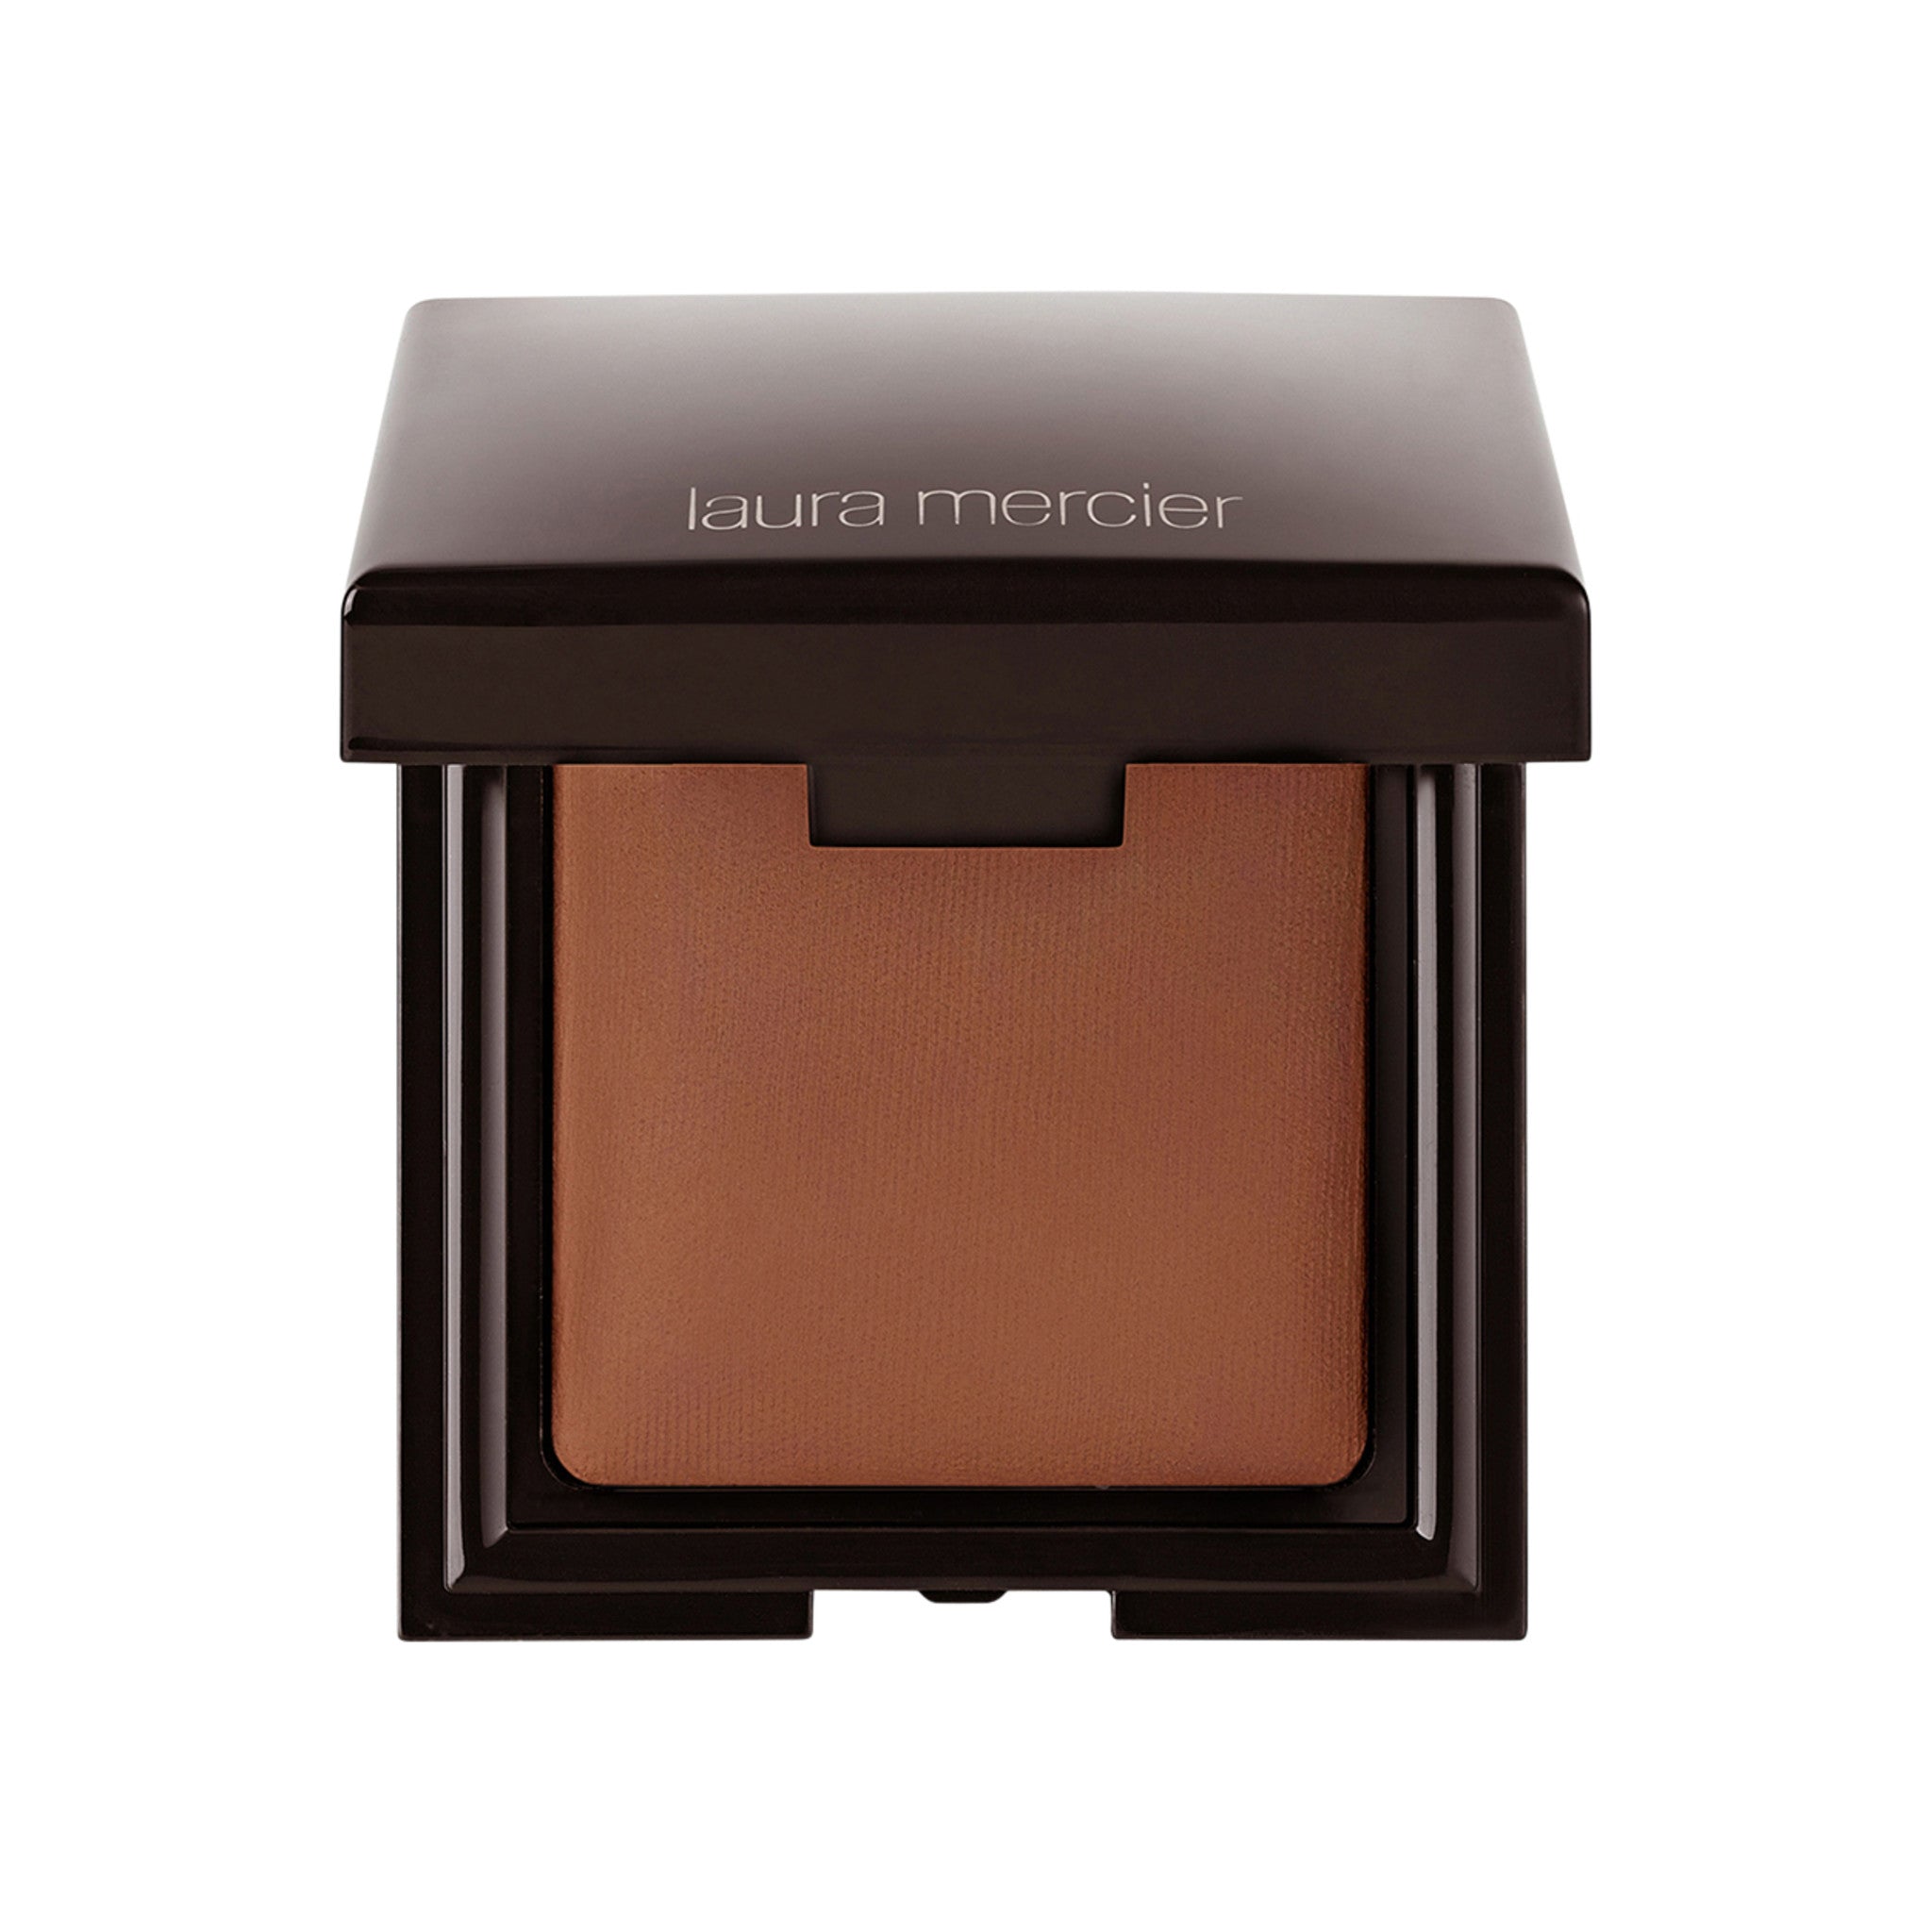 Laura Mercier Candleglow Sheer Perfect Powder Color/Shade variant: 5 main image. This product is for deep complexions